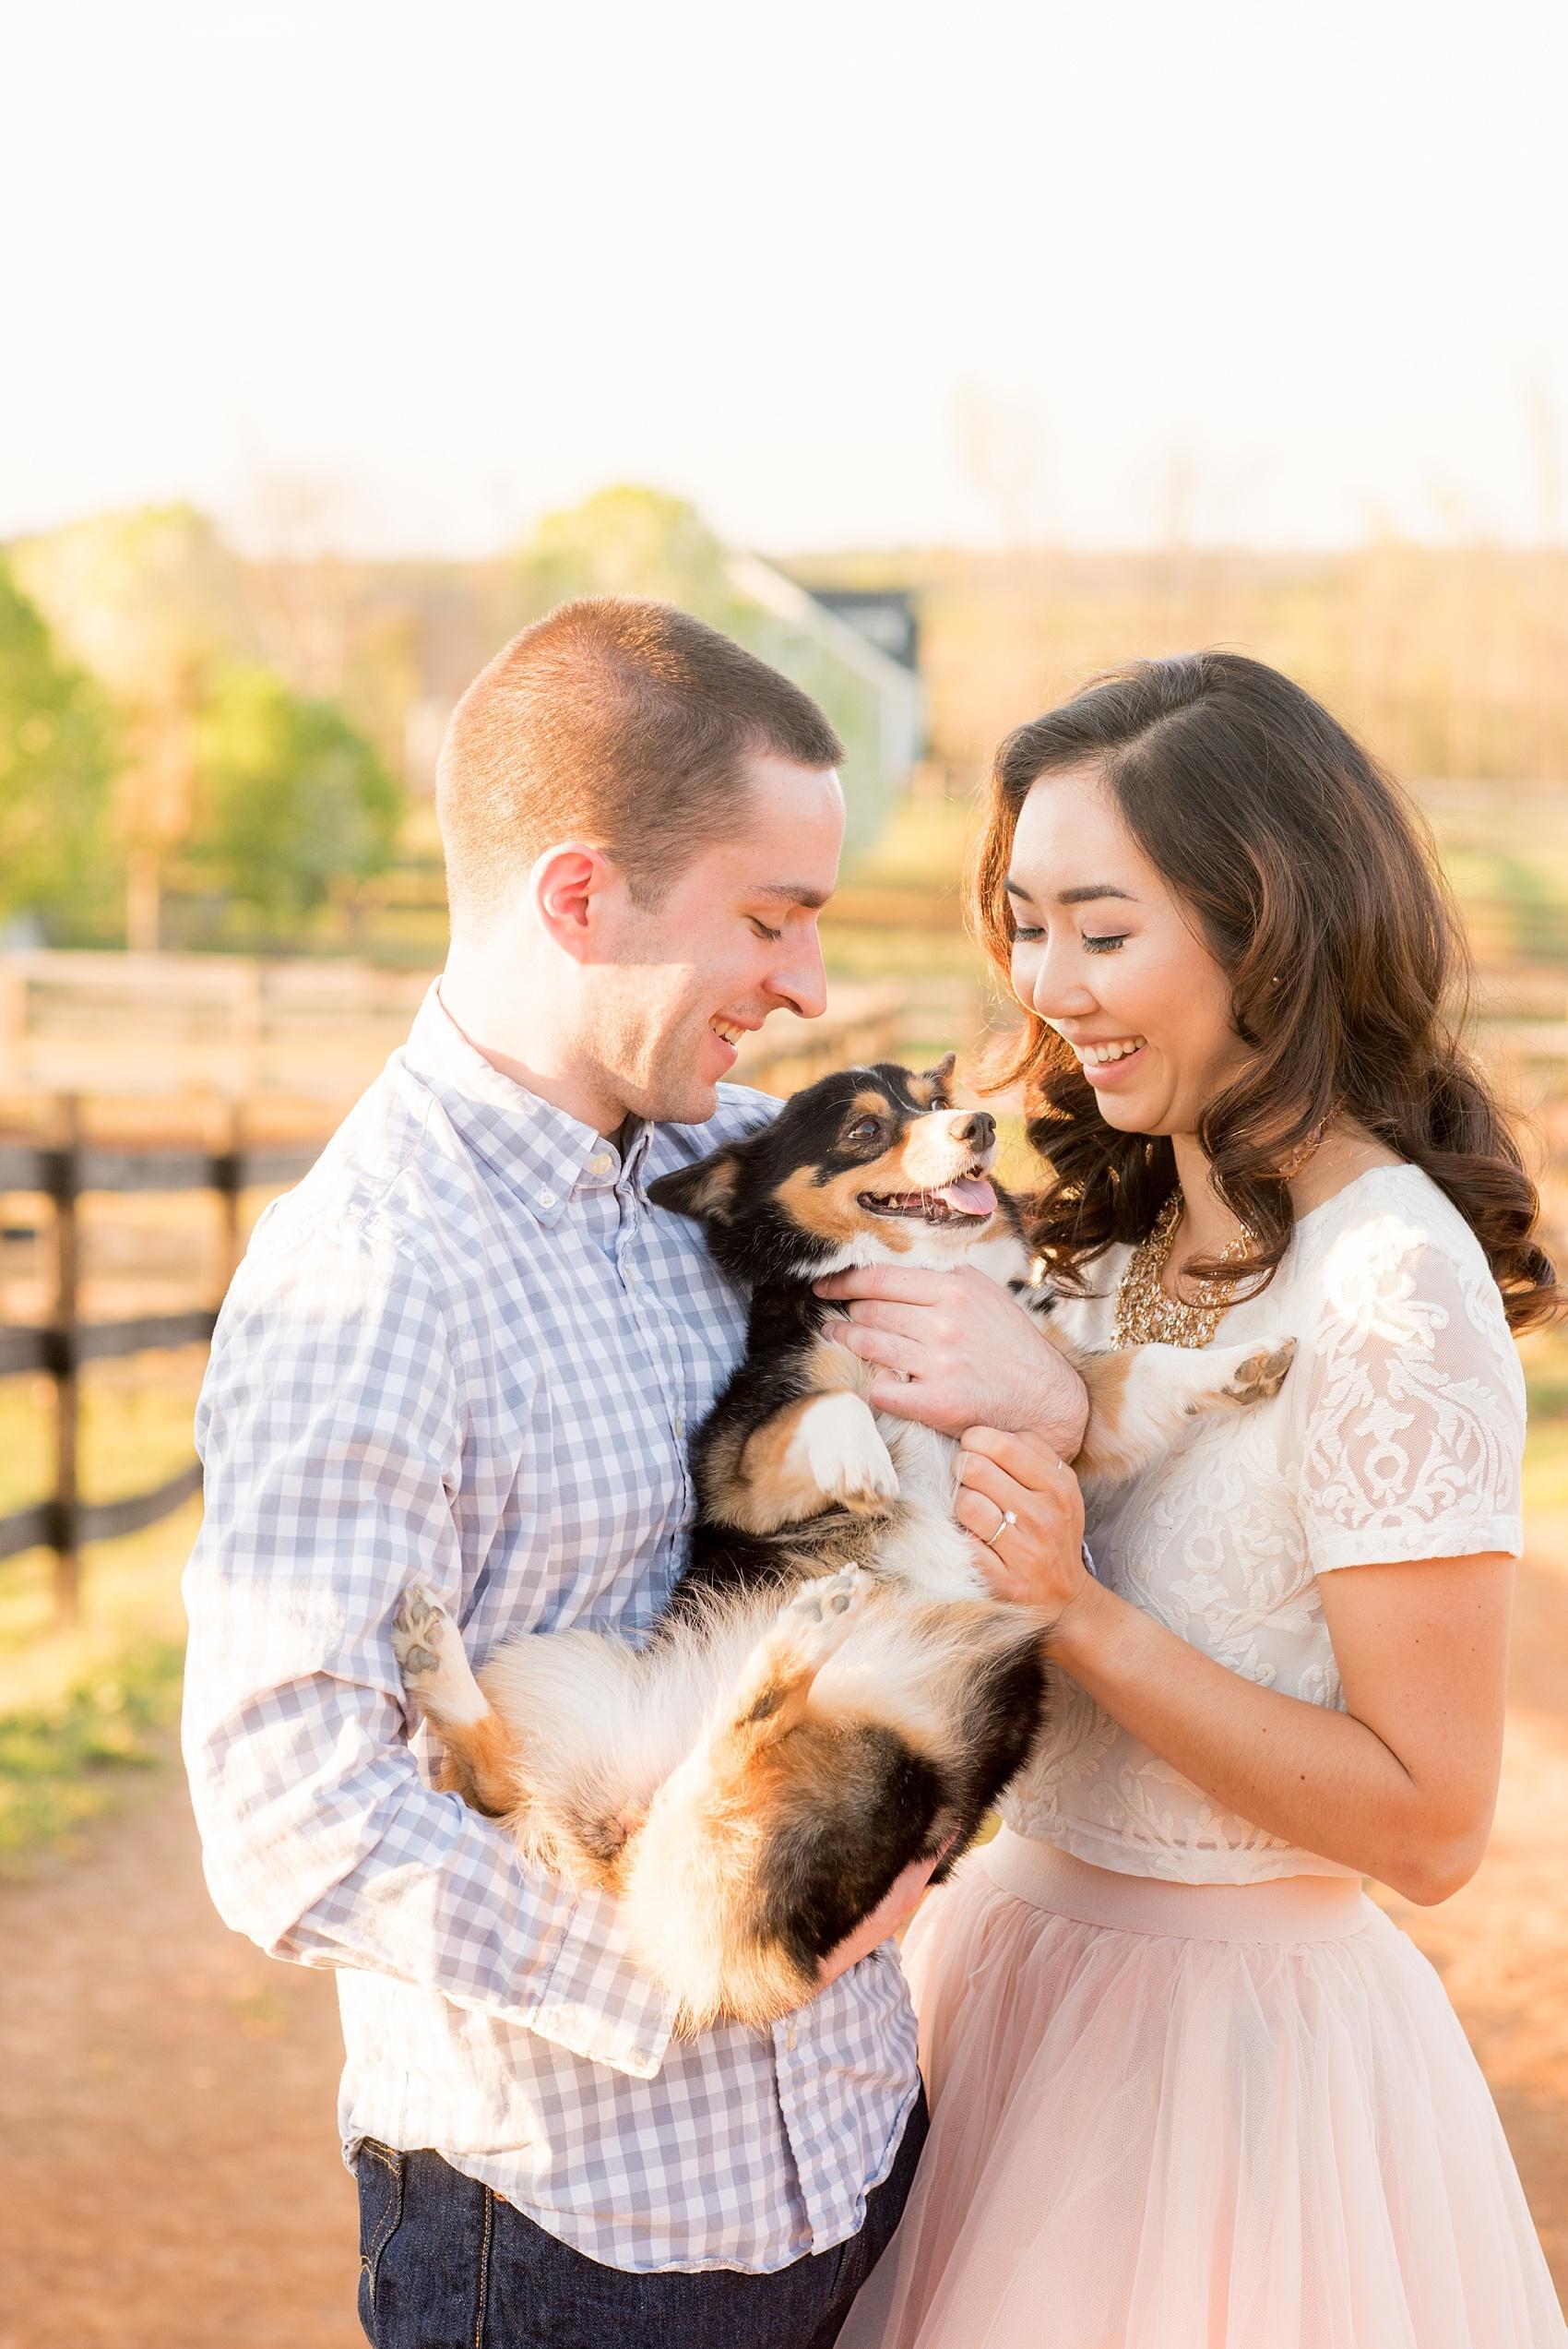 Raleigh farm engagement photos with Corgi dog. Images by Mikkel Paige Photography.